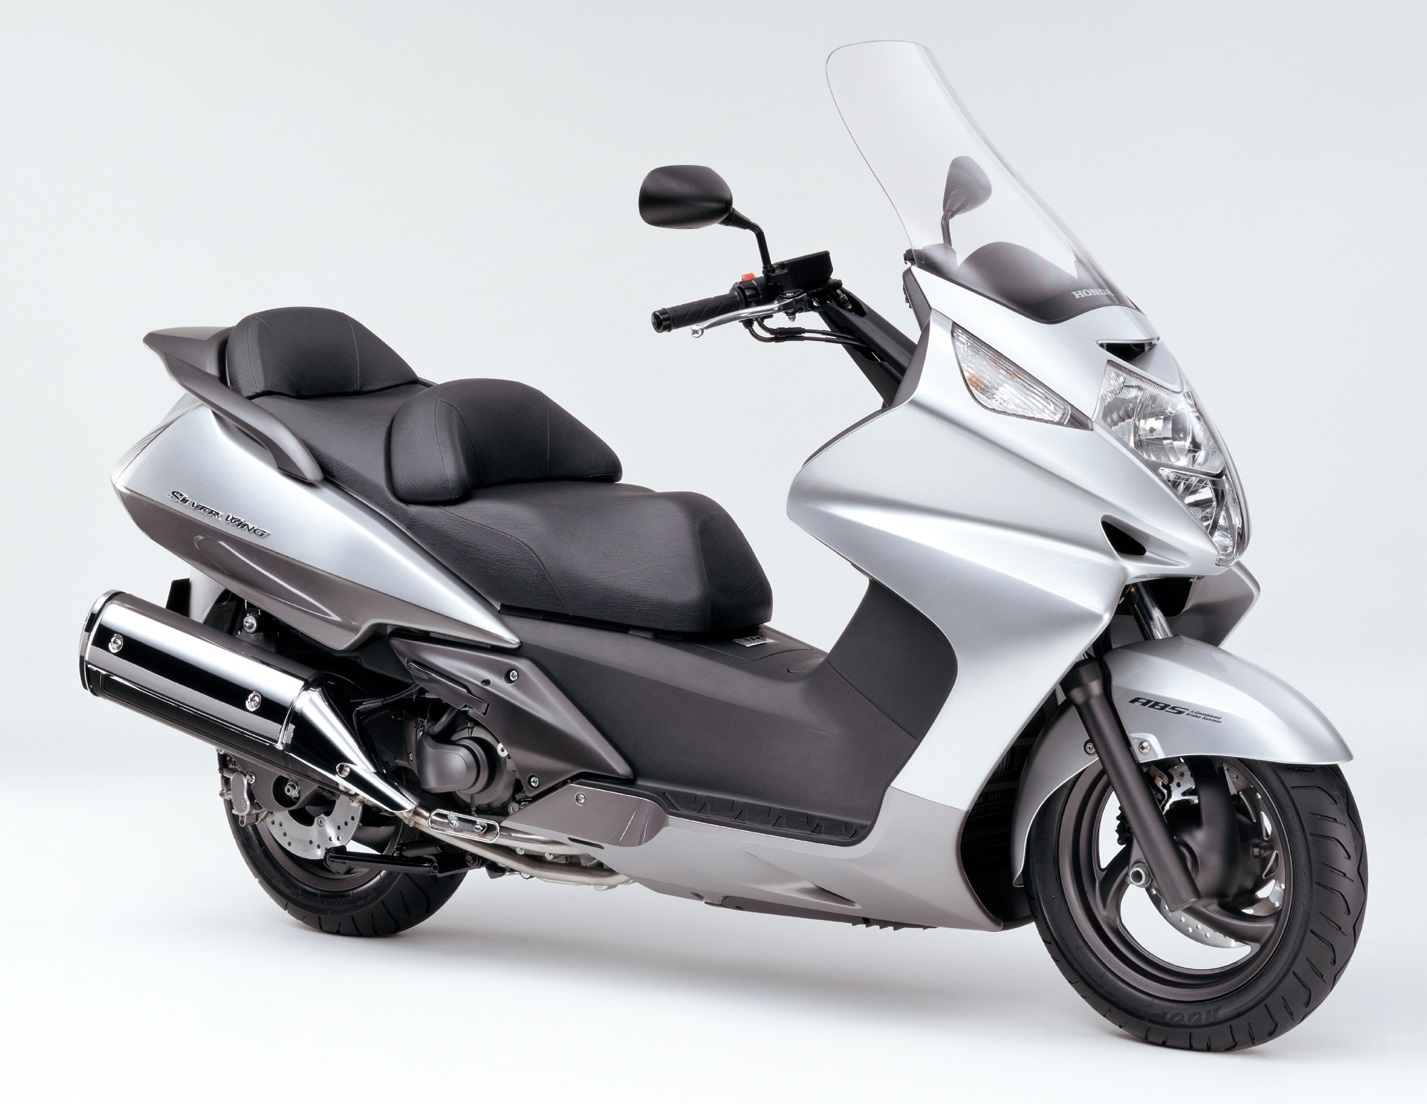 honda silverwing for sale